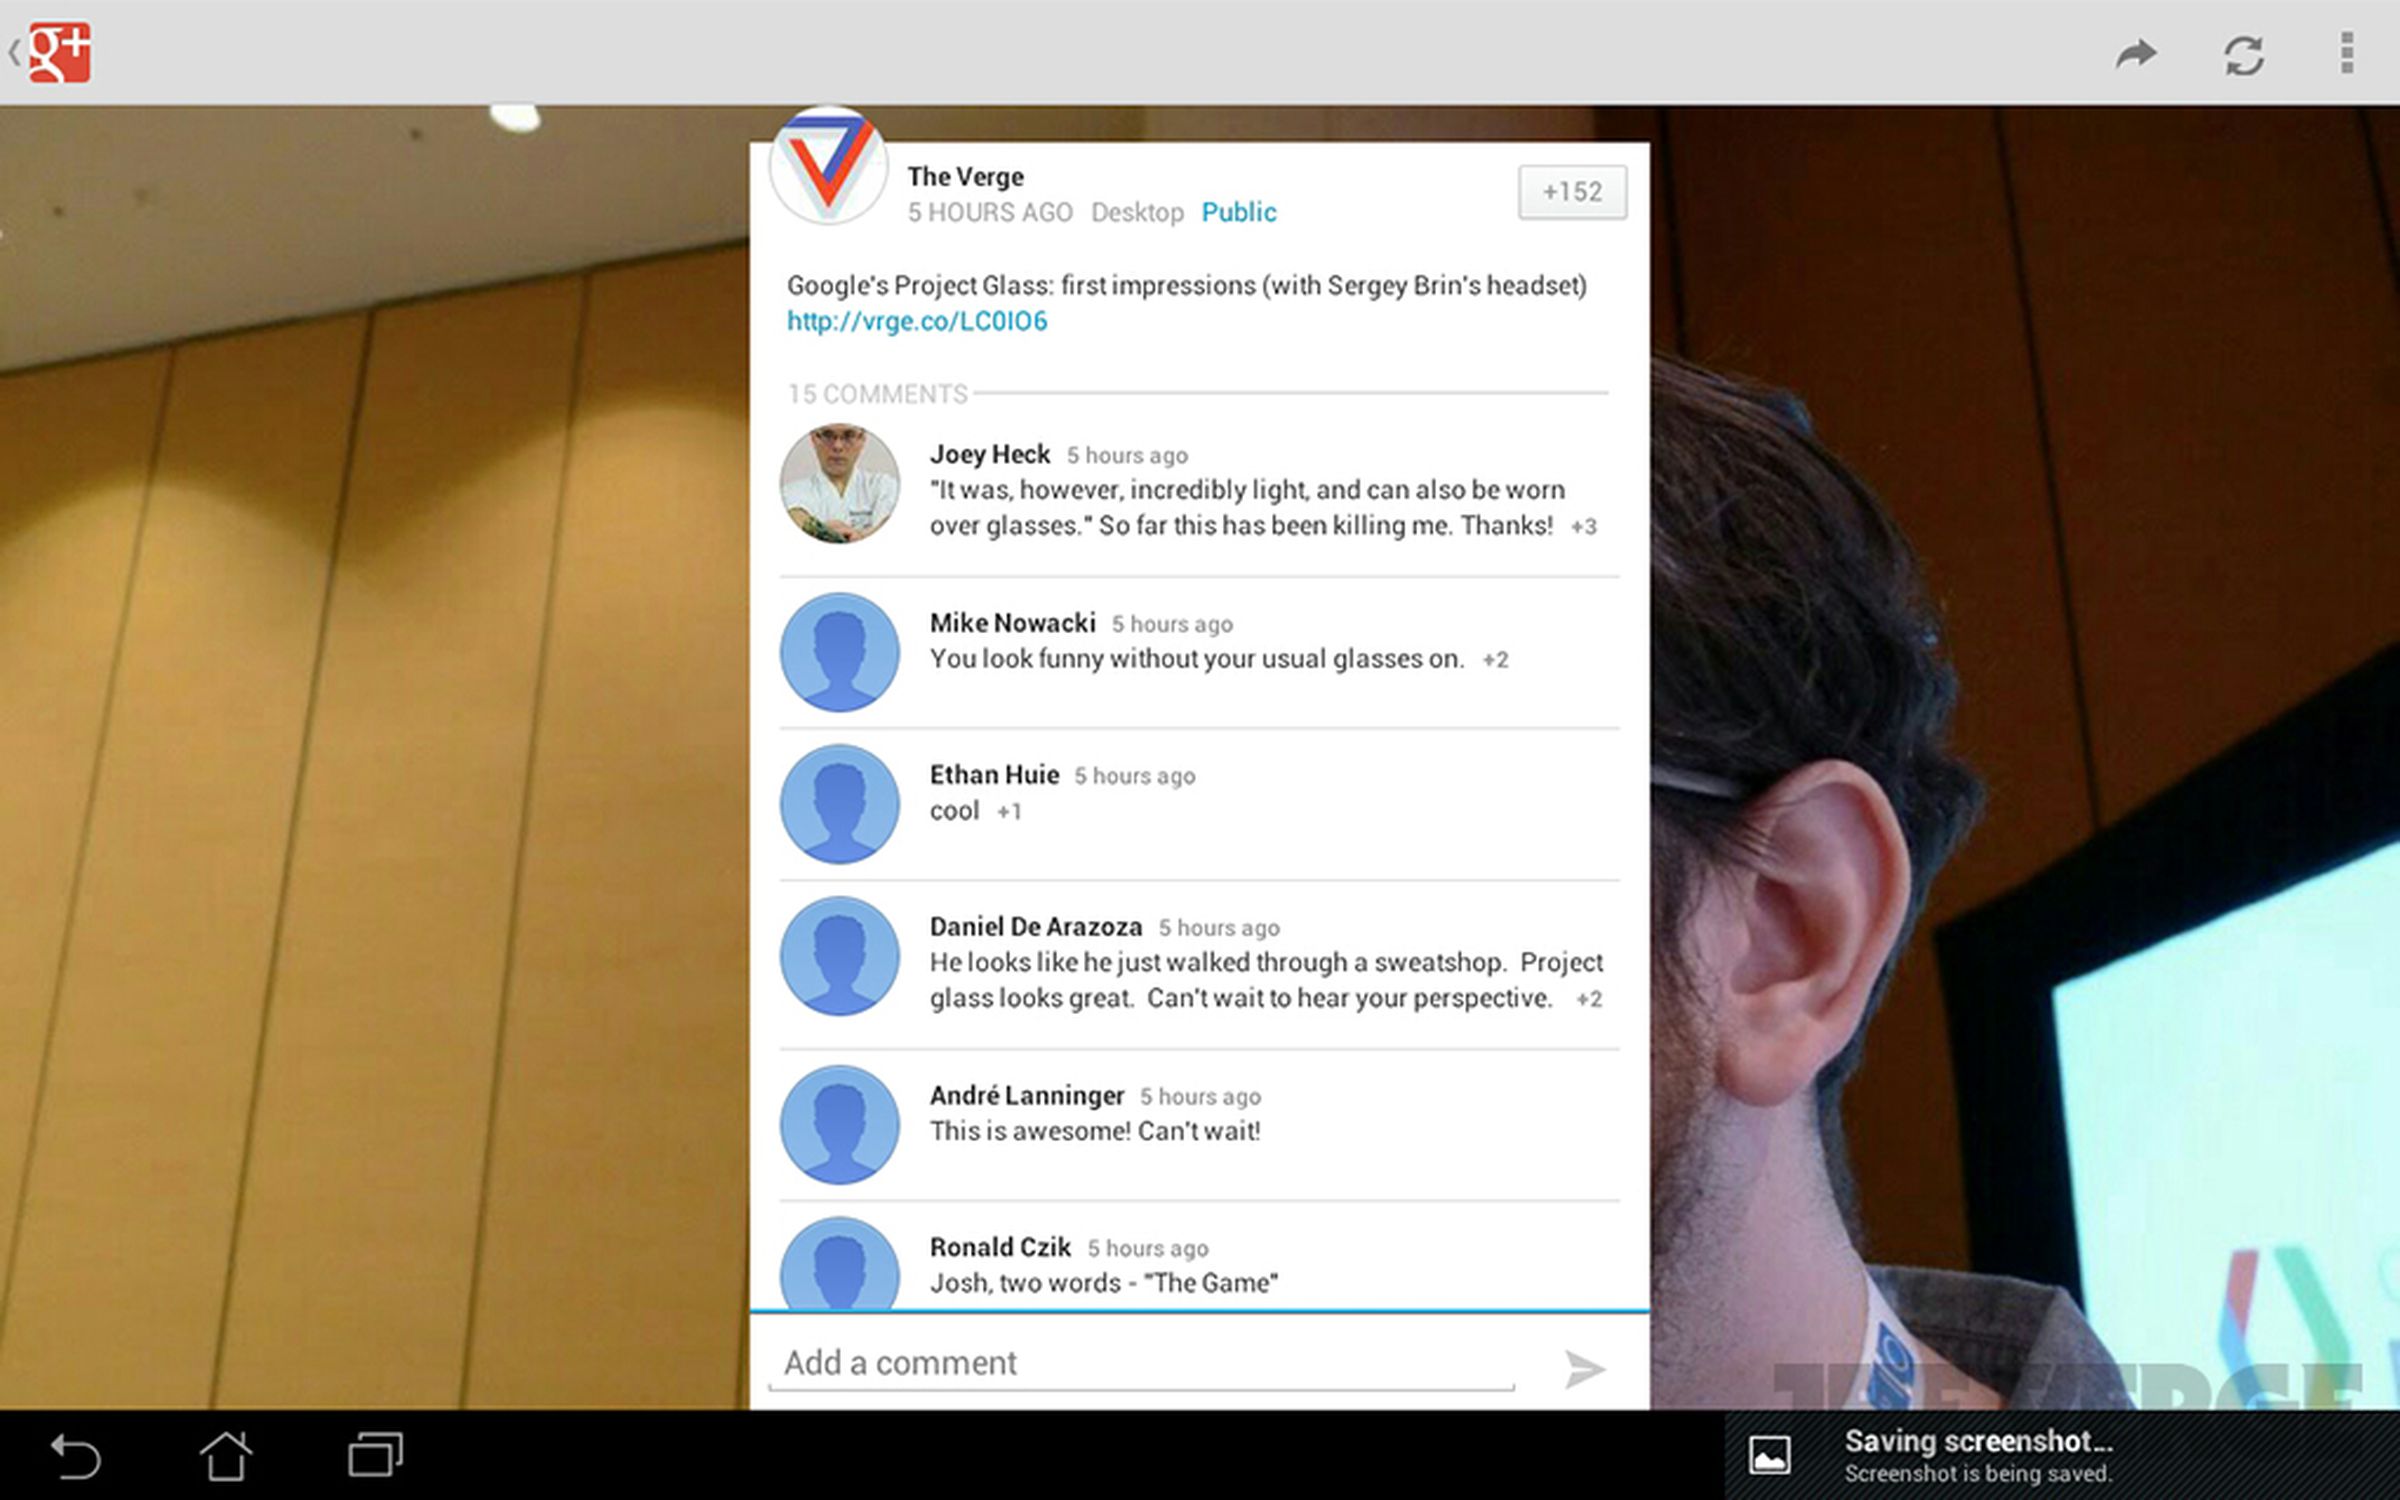 Google+ events and app updates hands-on pictures